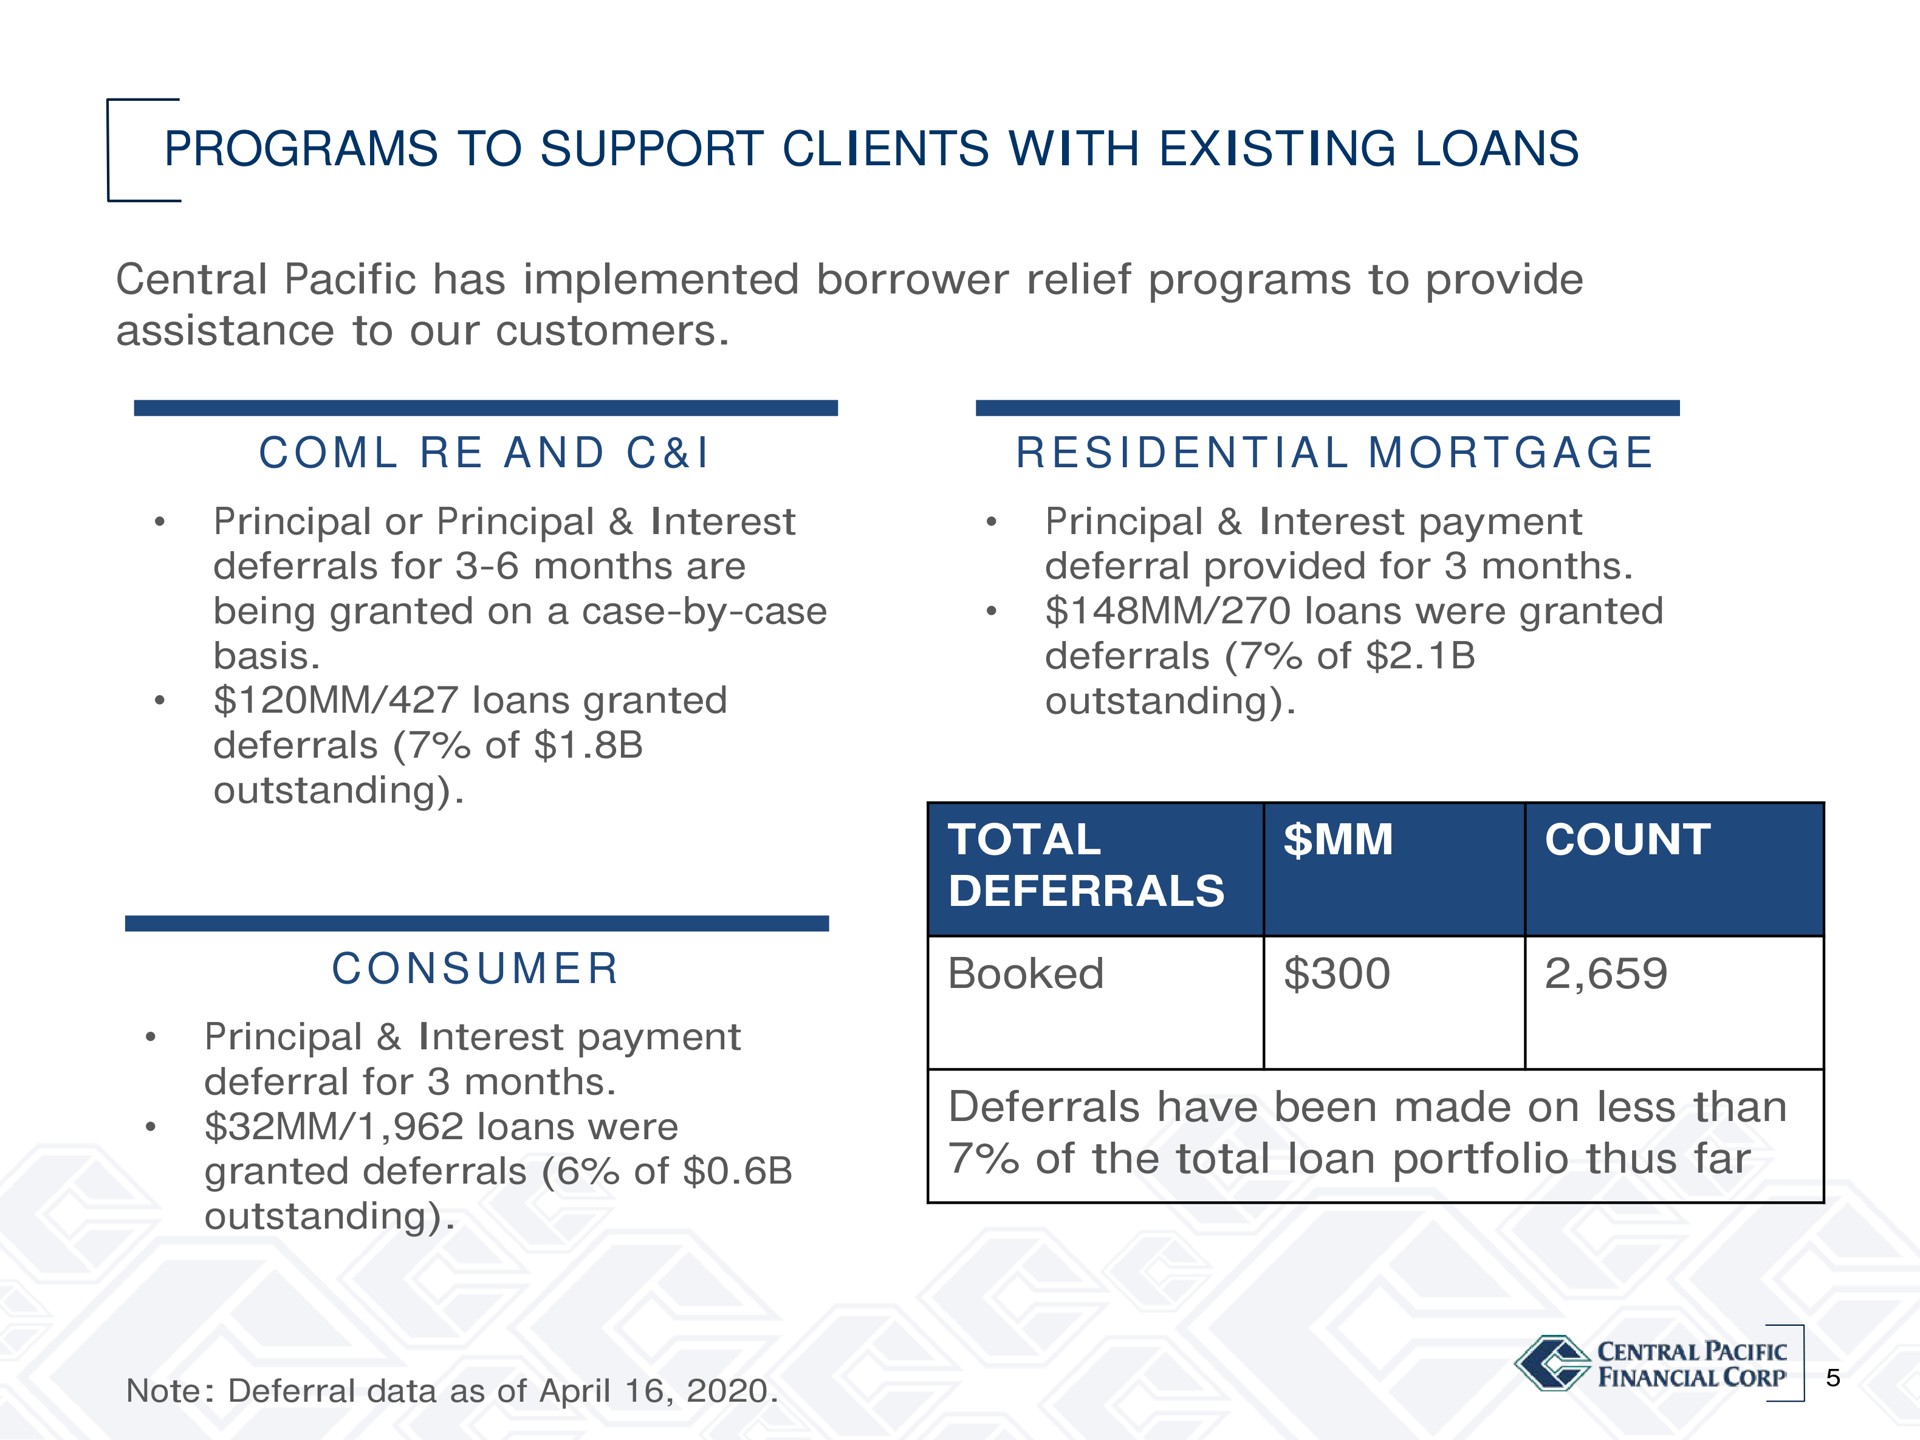 programs to support clients with existing loans central pacific has implemented borrower relief programs to provide assistance to our customers a i i i a a total deferrals count booked deferrals have been made on less than of the total loan portfolio thus far | Central Pacific Financial